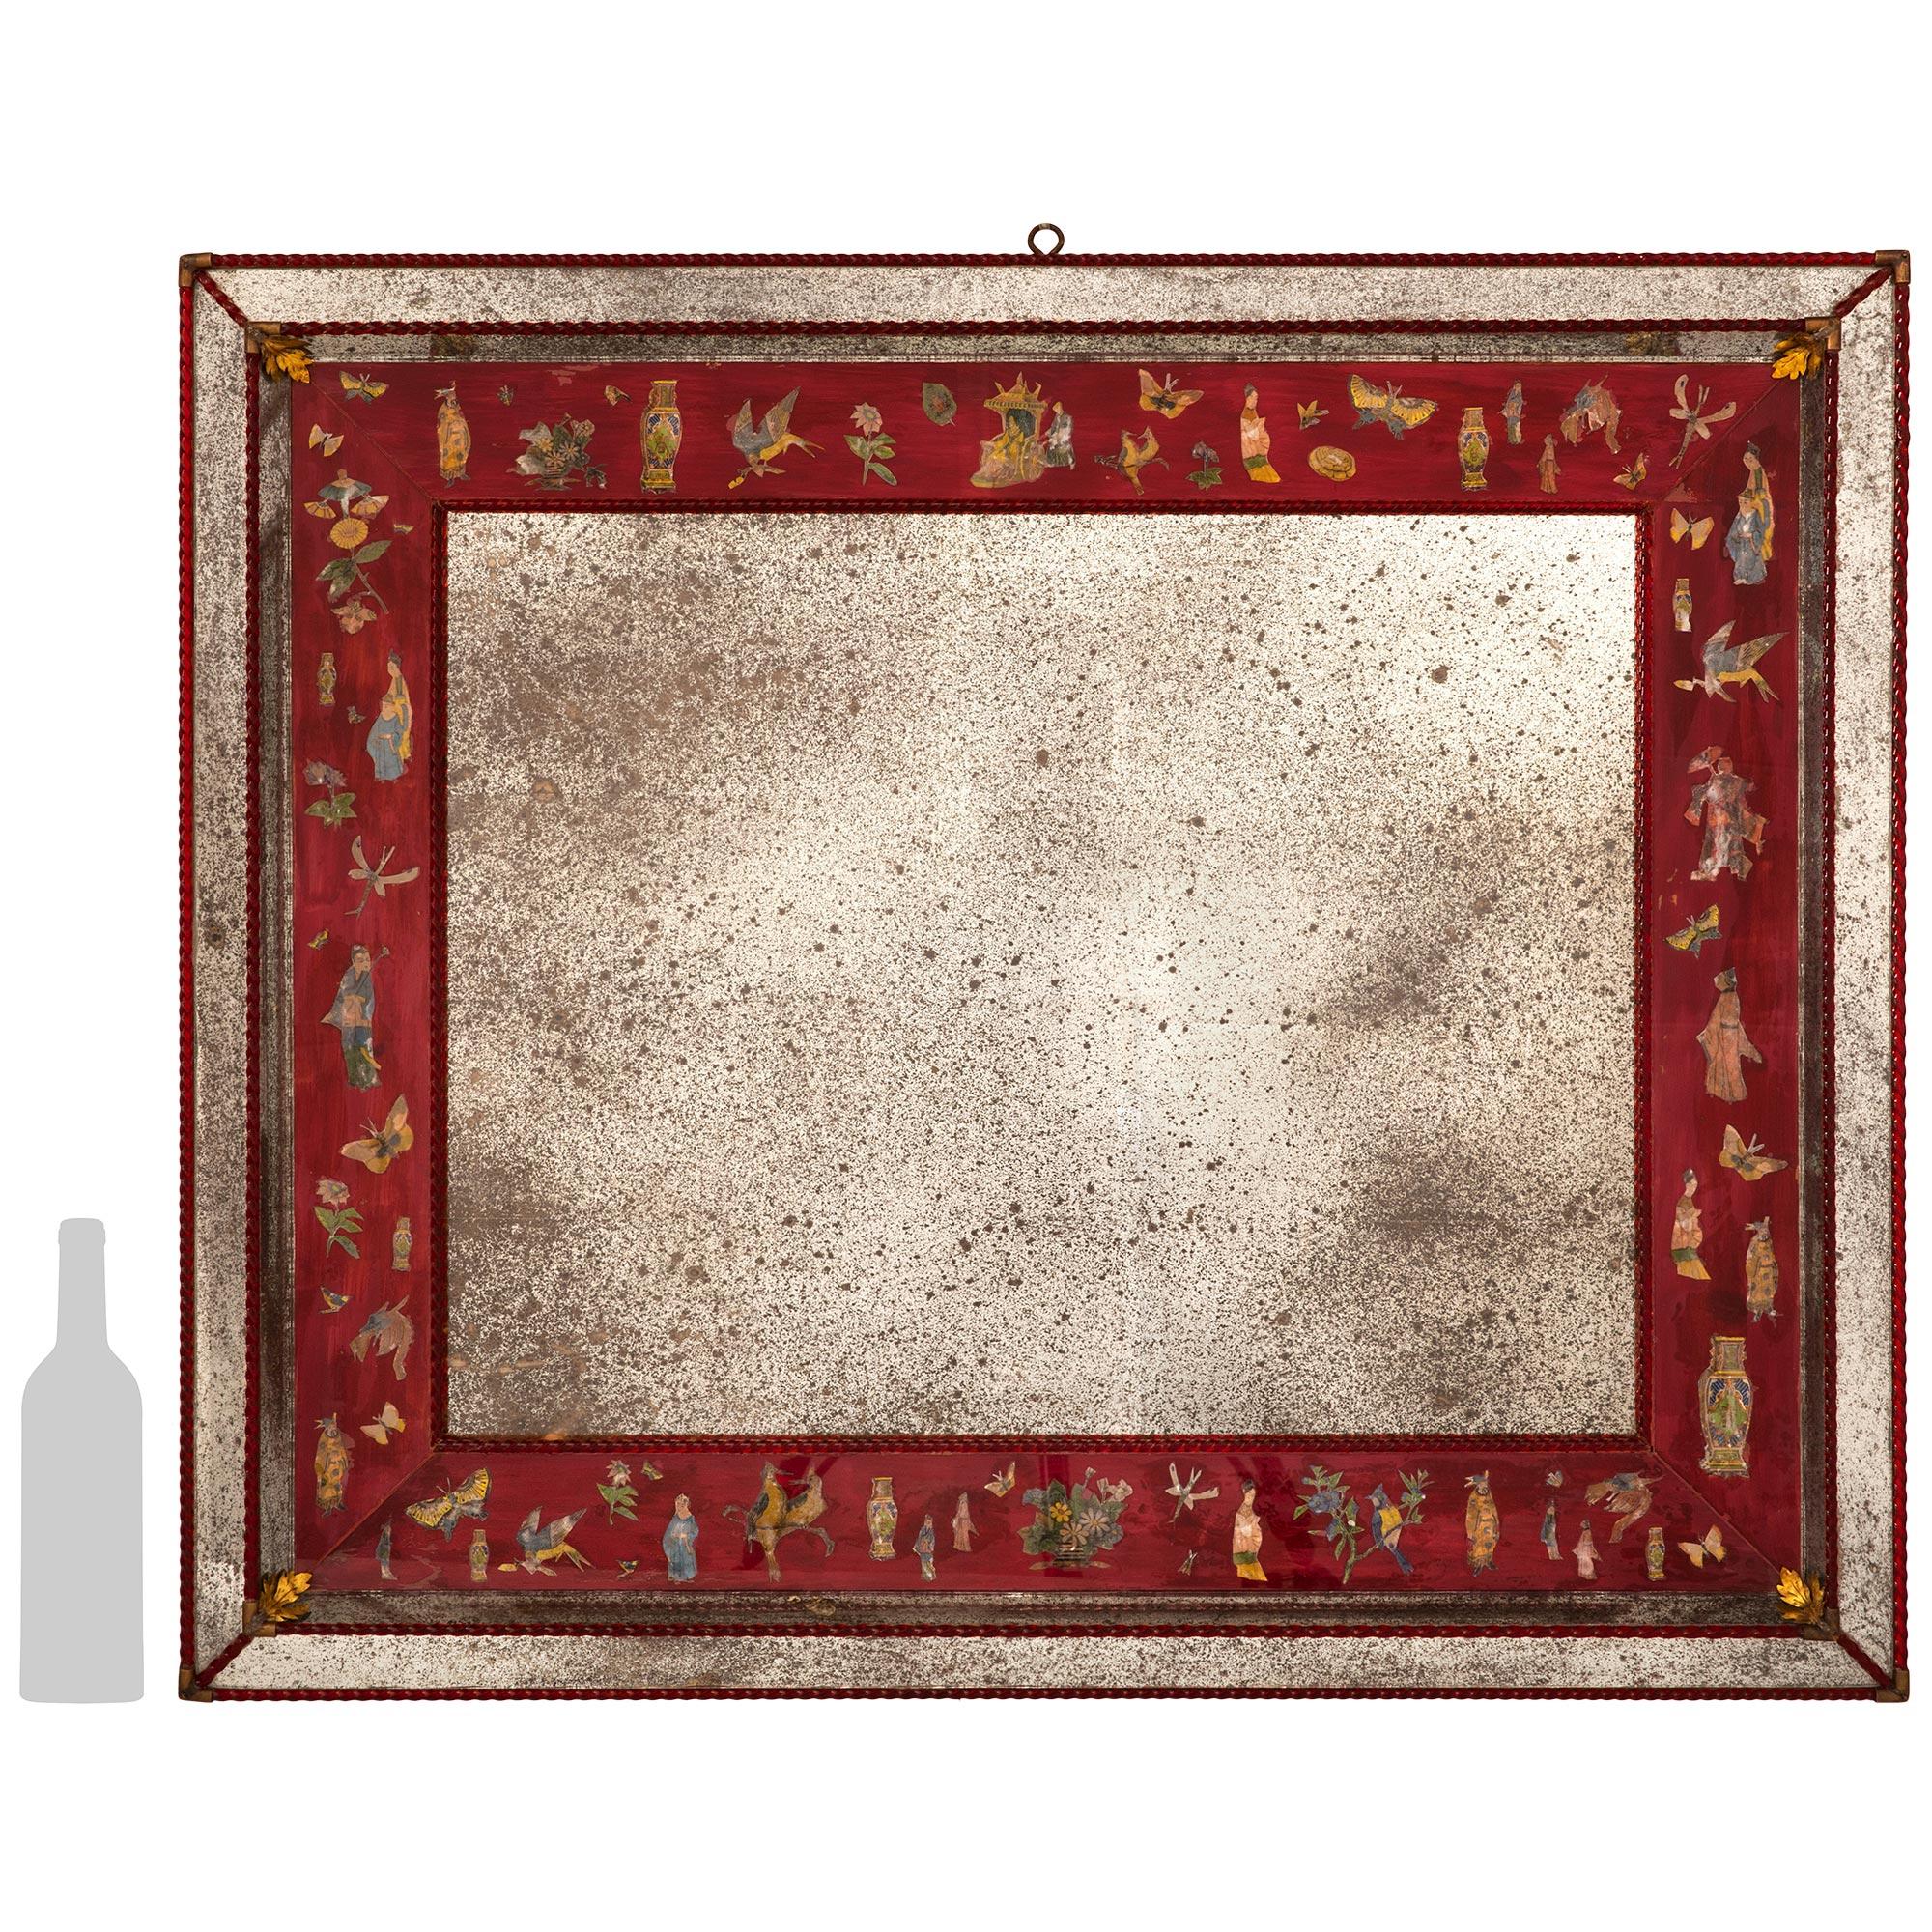 A stunning and unique pair of Italian turn of the century Églomisé and Lacca Povera mirrors. These beautiful rectangular mirrors are decorated by several red twisted glass bands throughout. Bordering the central mirror plate are highly detailed red